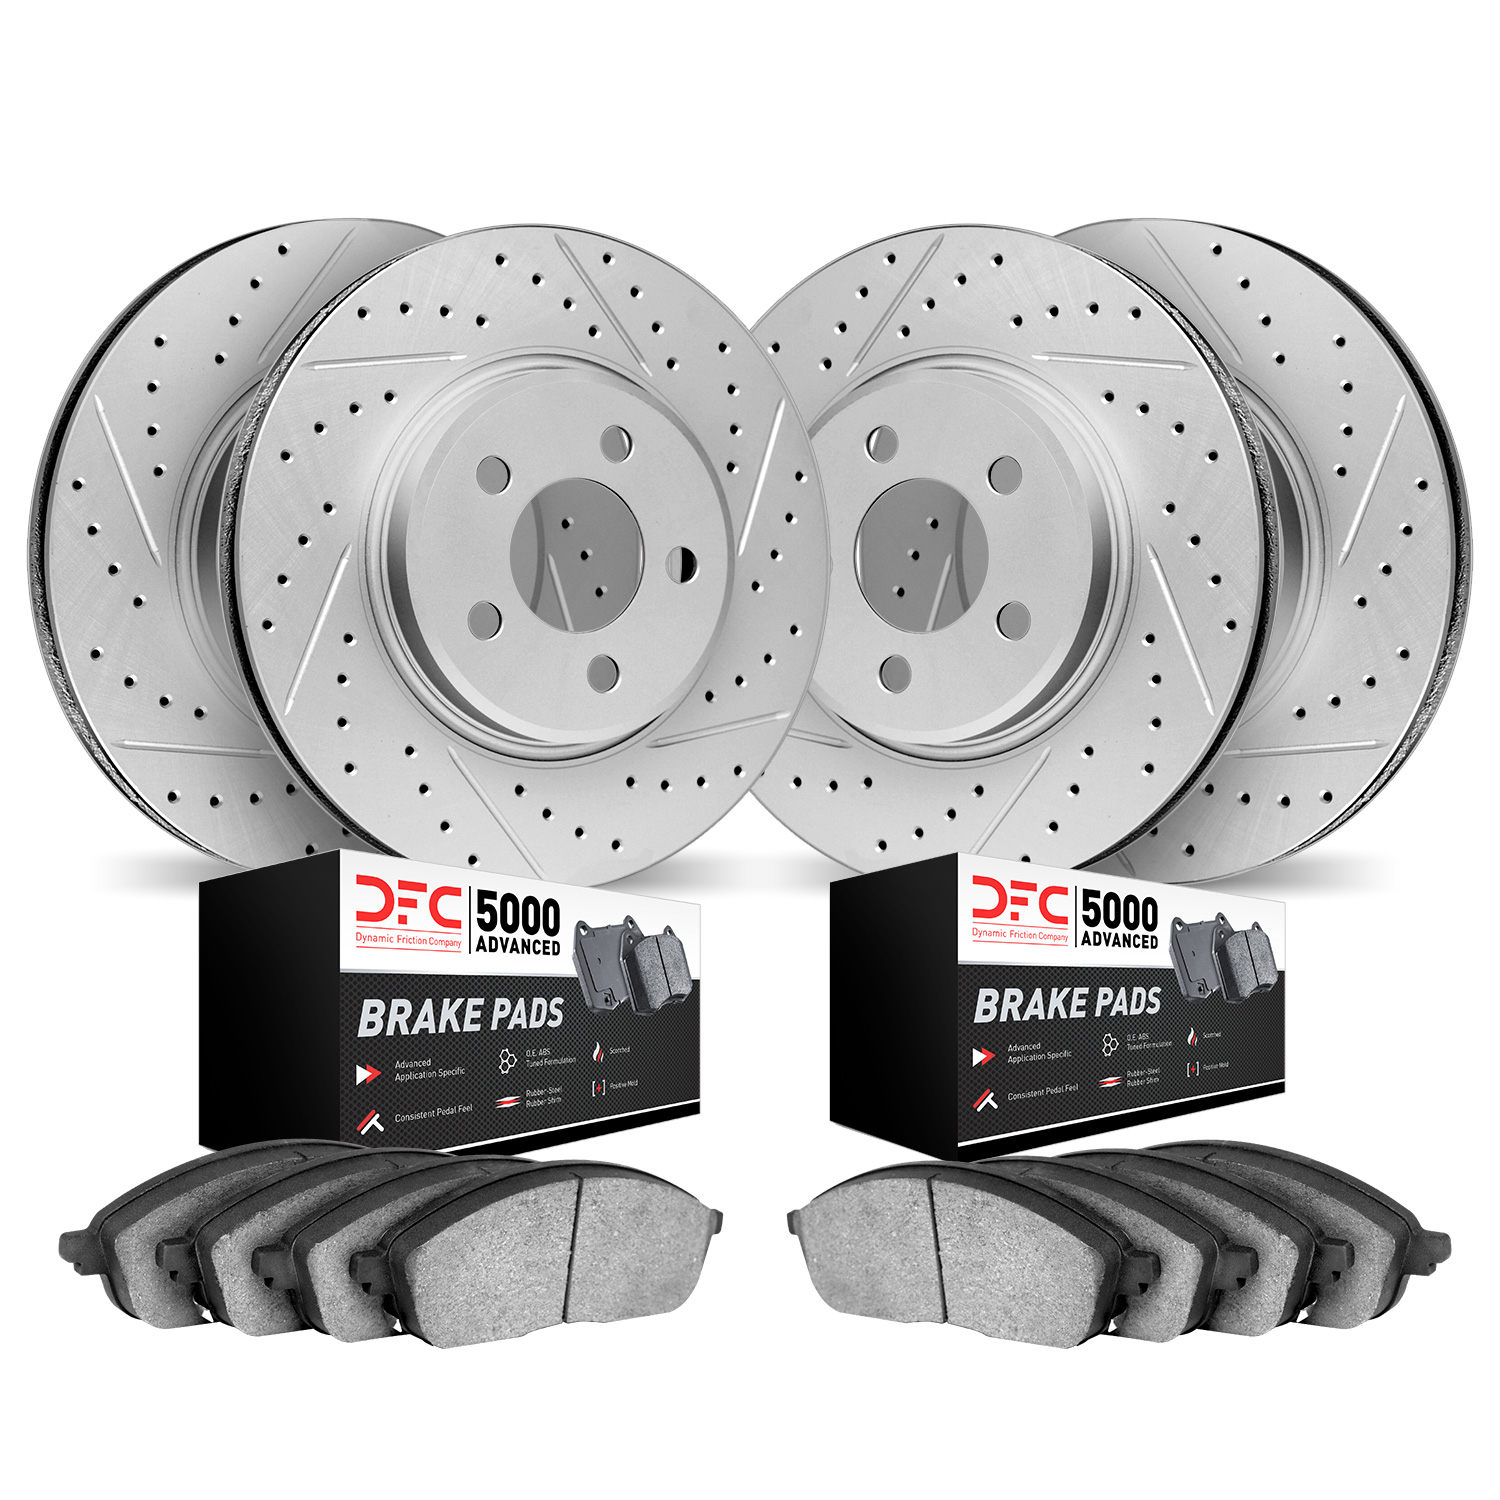 2504-40086 Geoperformance Drilled/Slotted Rotors w/5000 Advanced Brake Pads Kit, 2002-2006 Multiple Makes/Models, Position: Fron